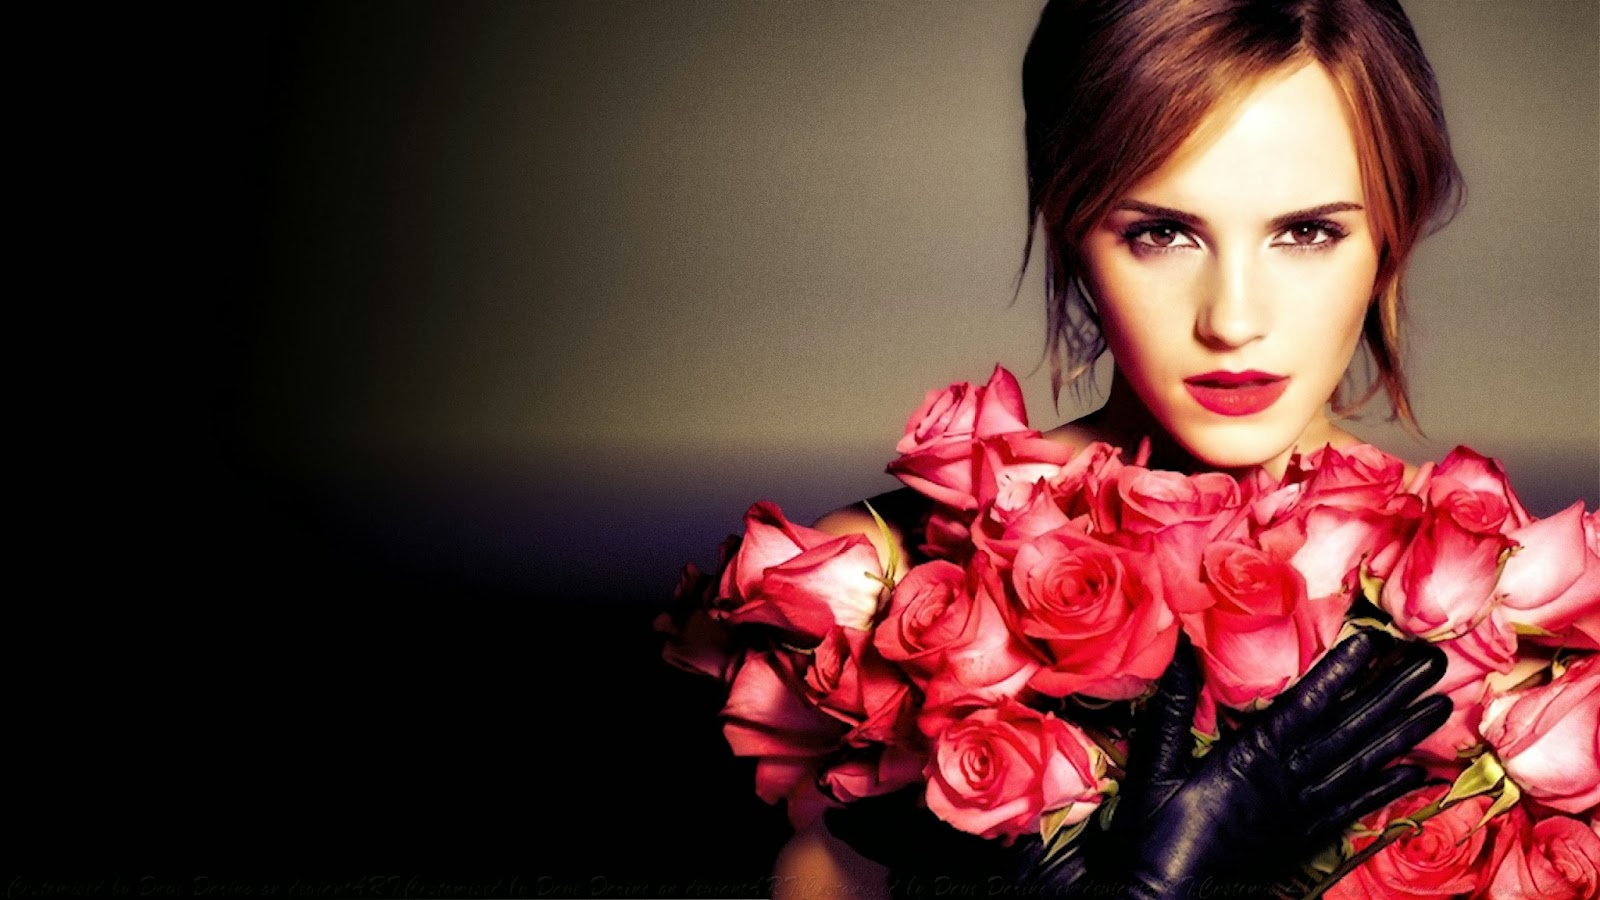 emma watson roses and leather (1).jpg